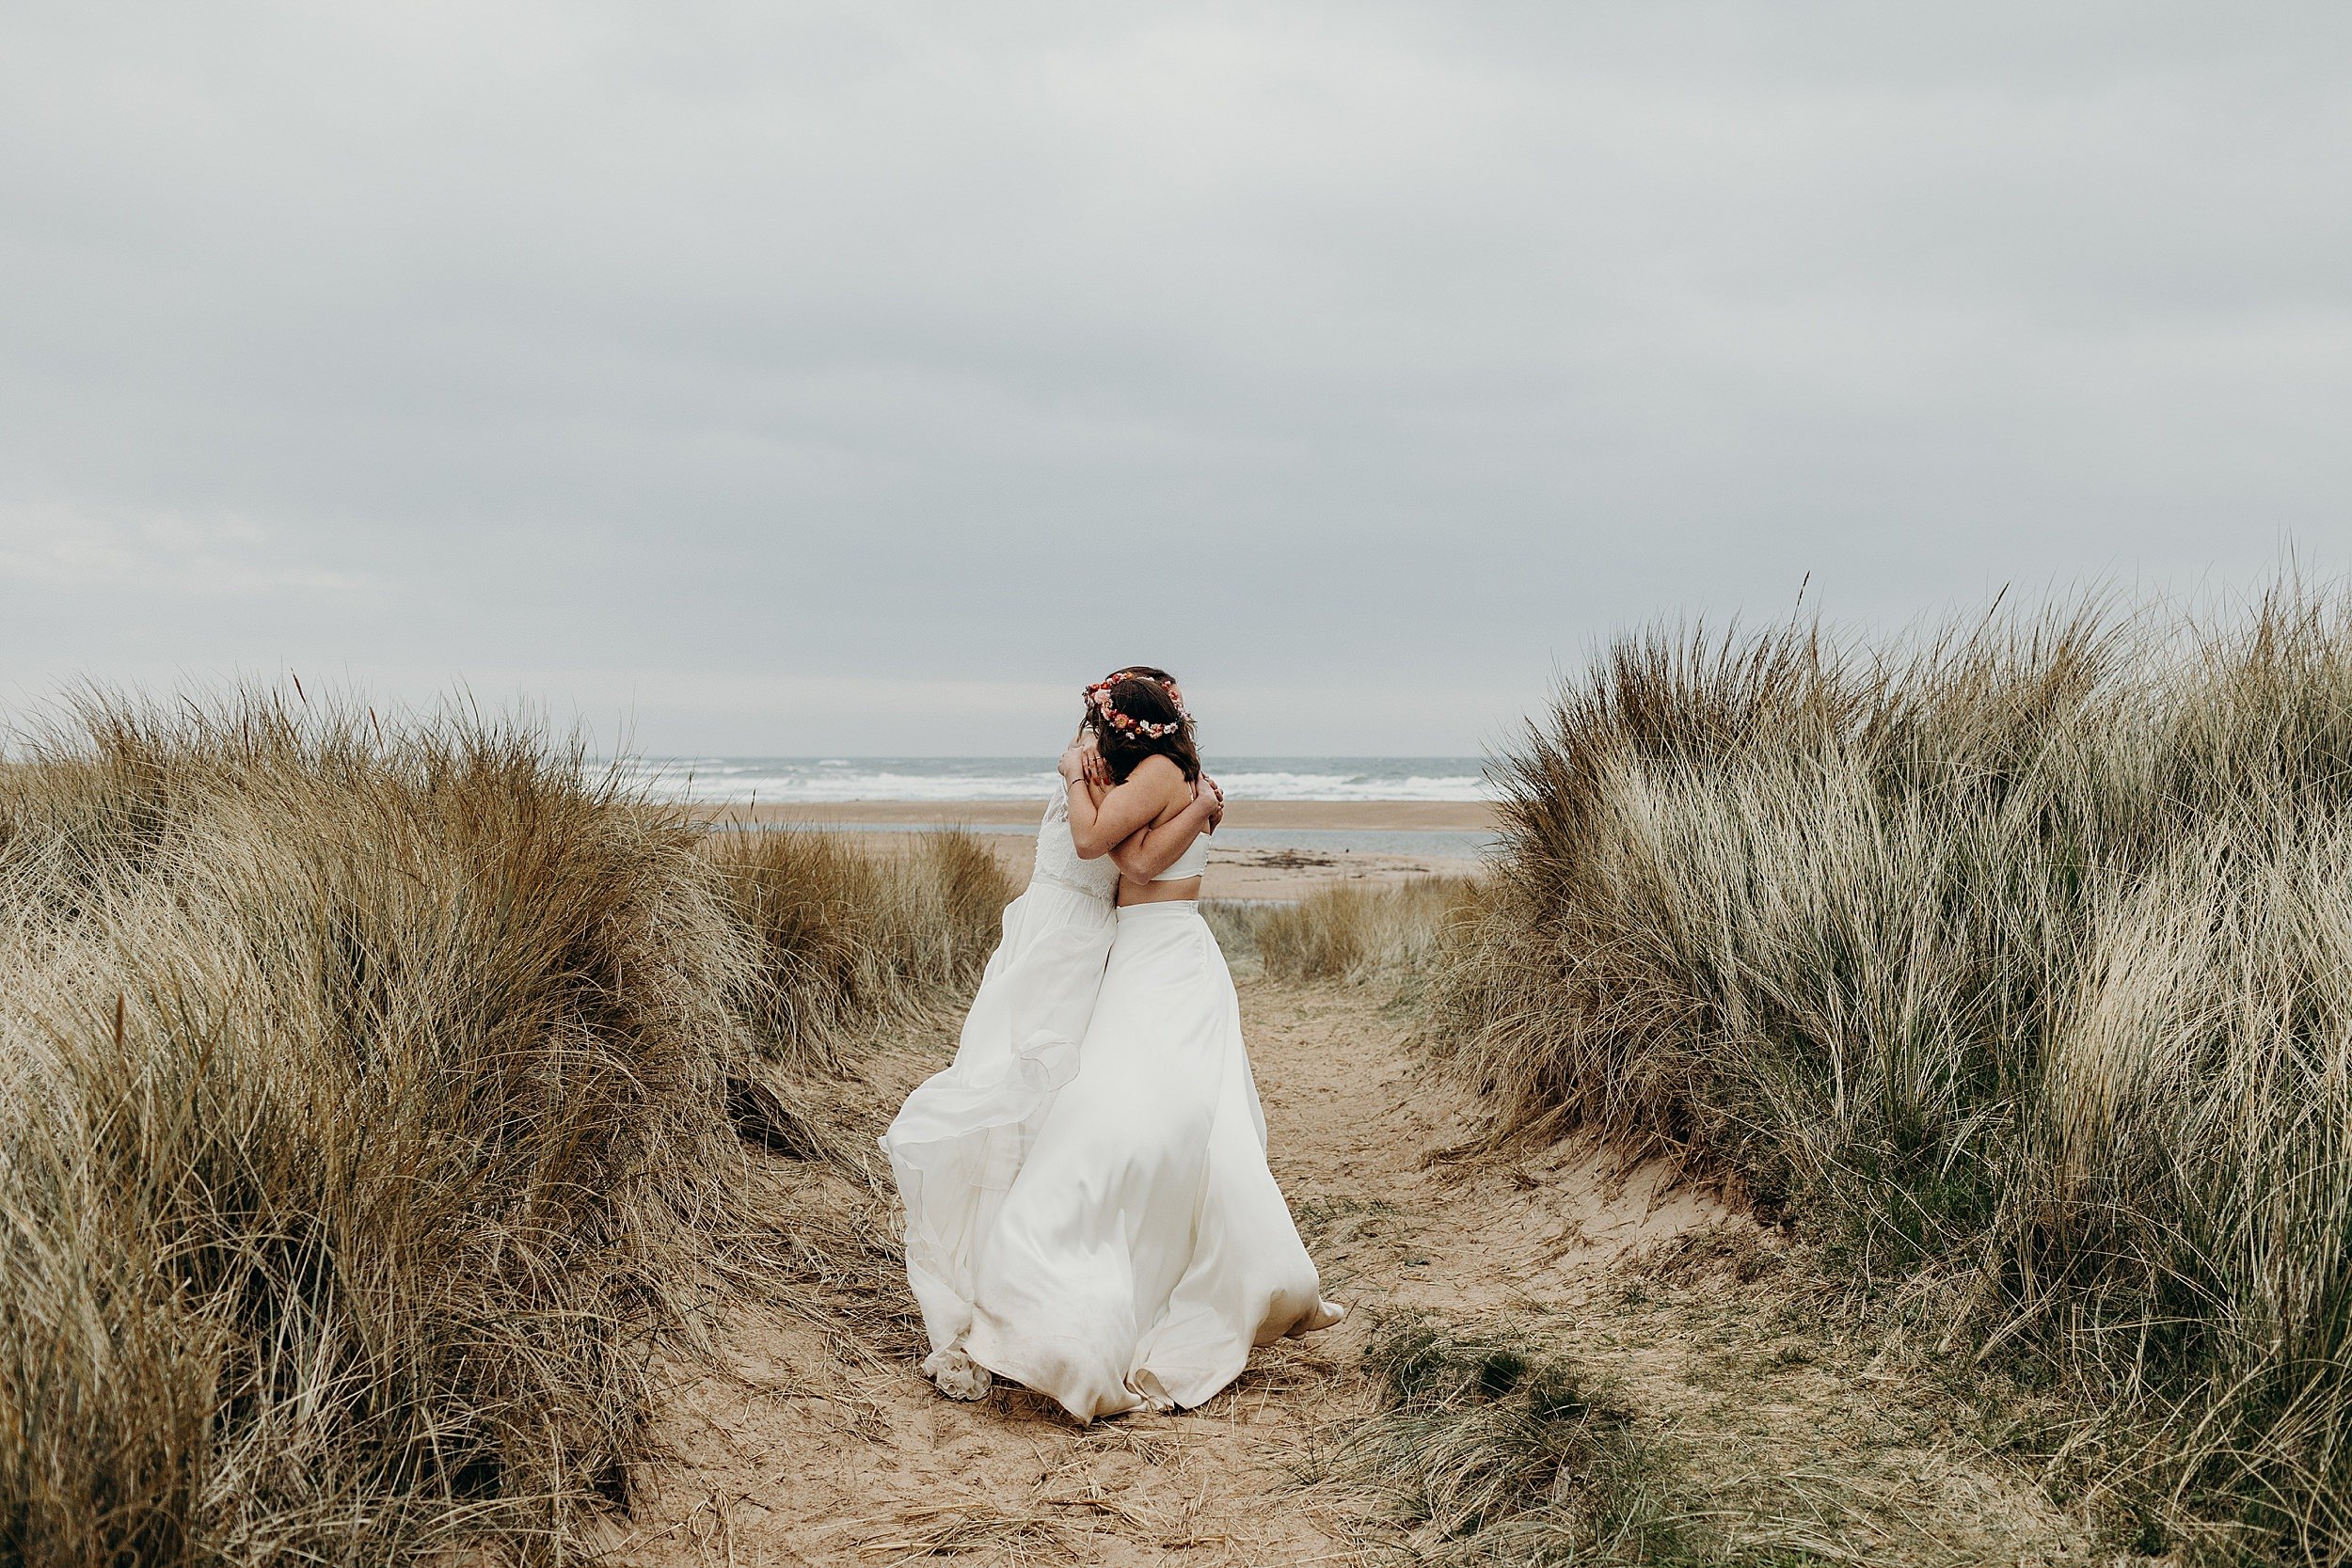 two brides wearing white dresses embrace in the sand dunes with the sea and beach visible in the distance following their harvest moon wedding in dunbar scotland